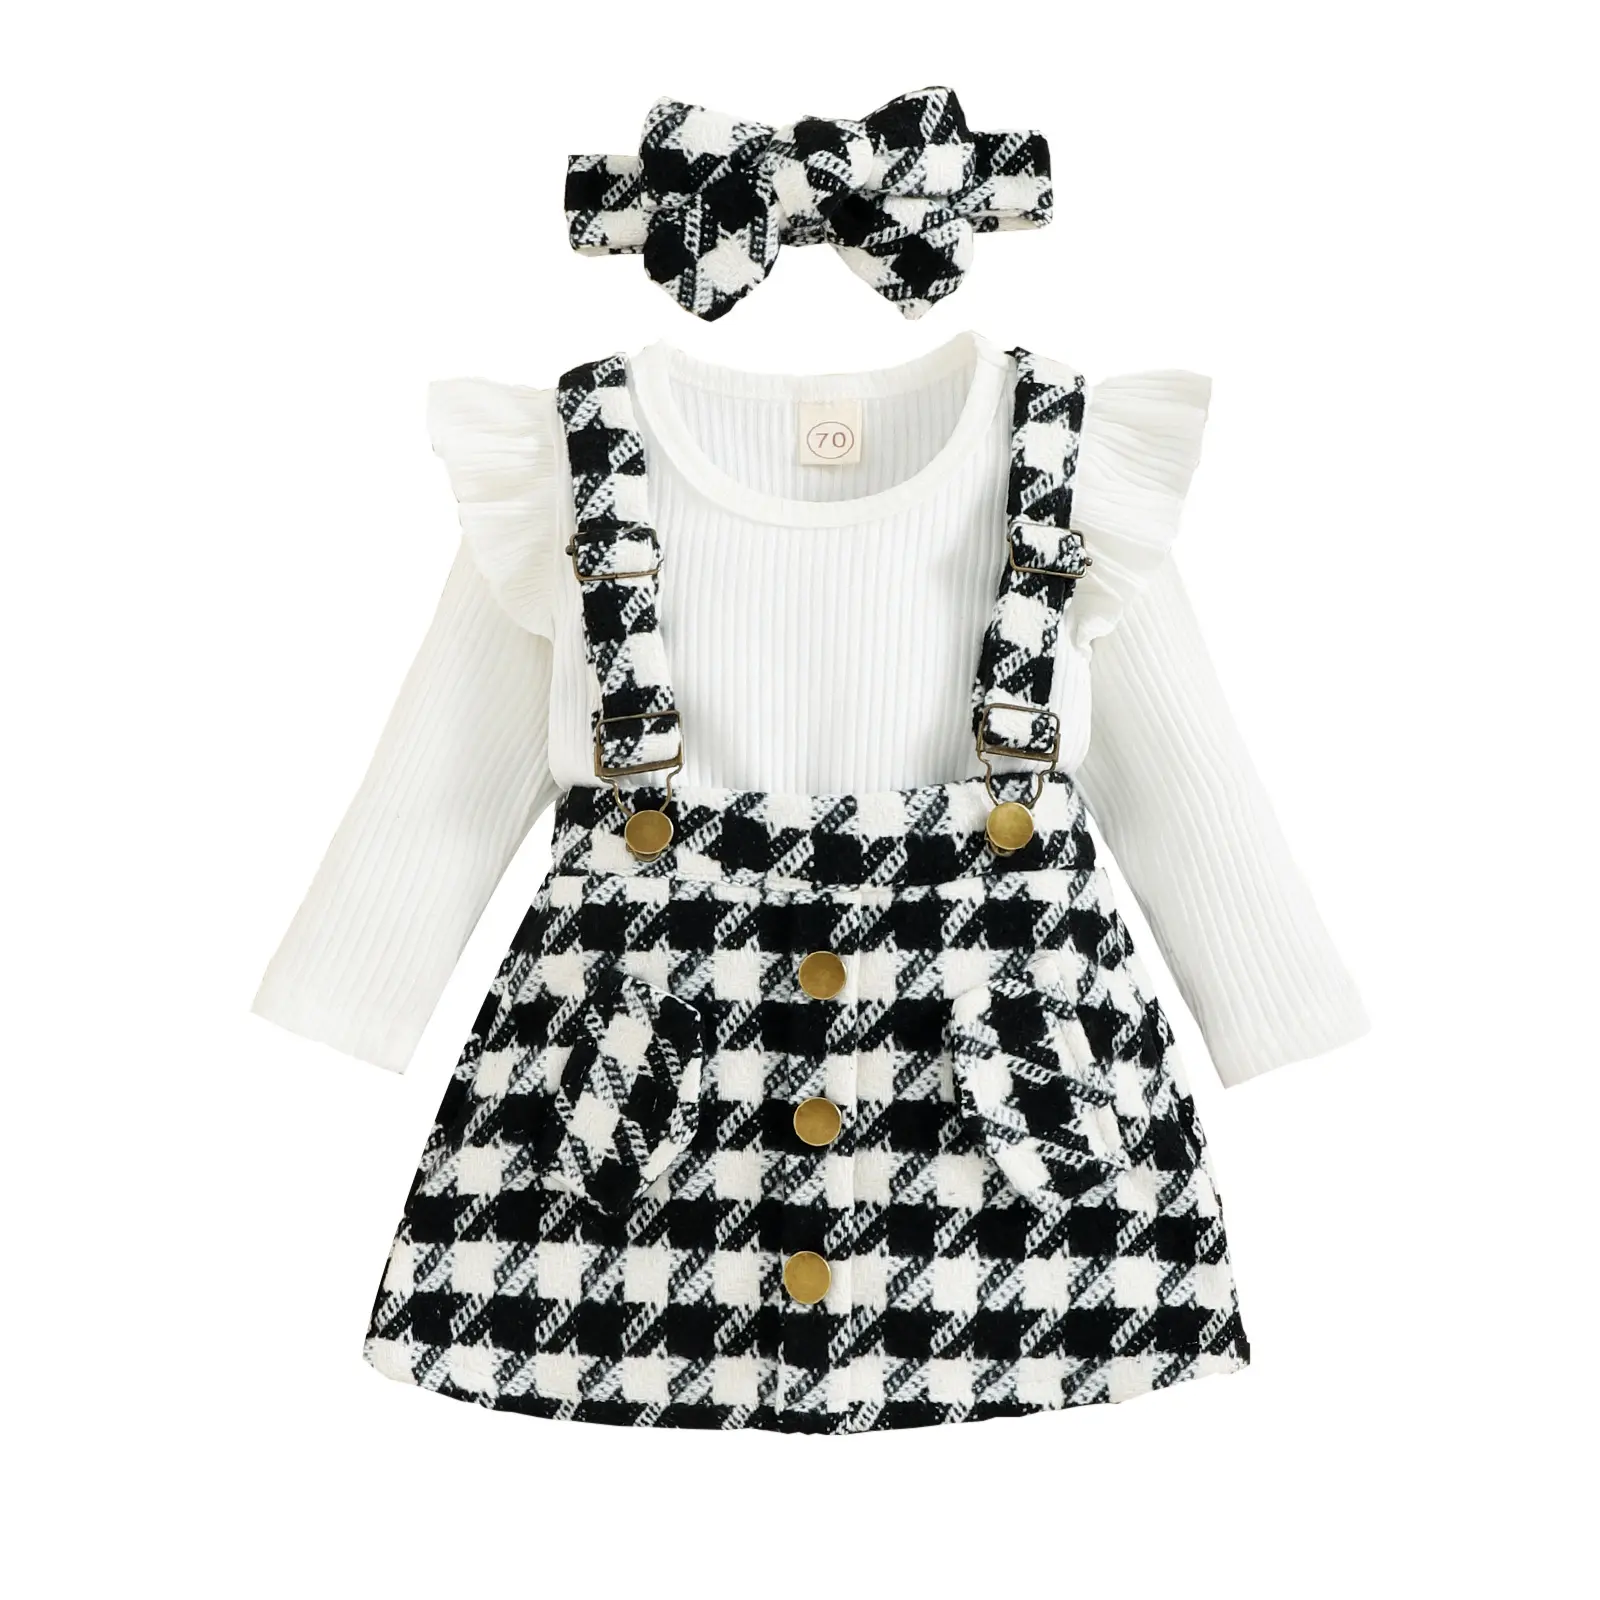 Fashion autumn 4 years plaid 3pcs set girl shirts overall dress for baby